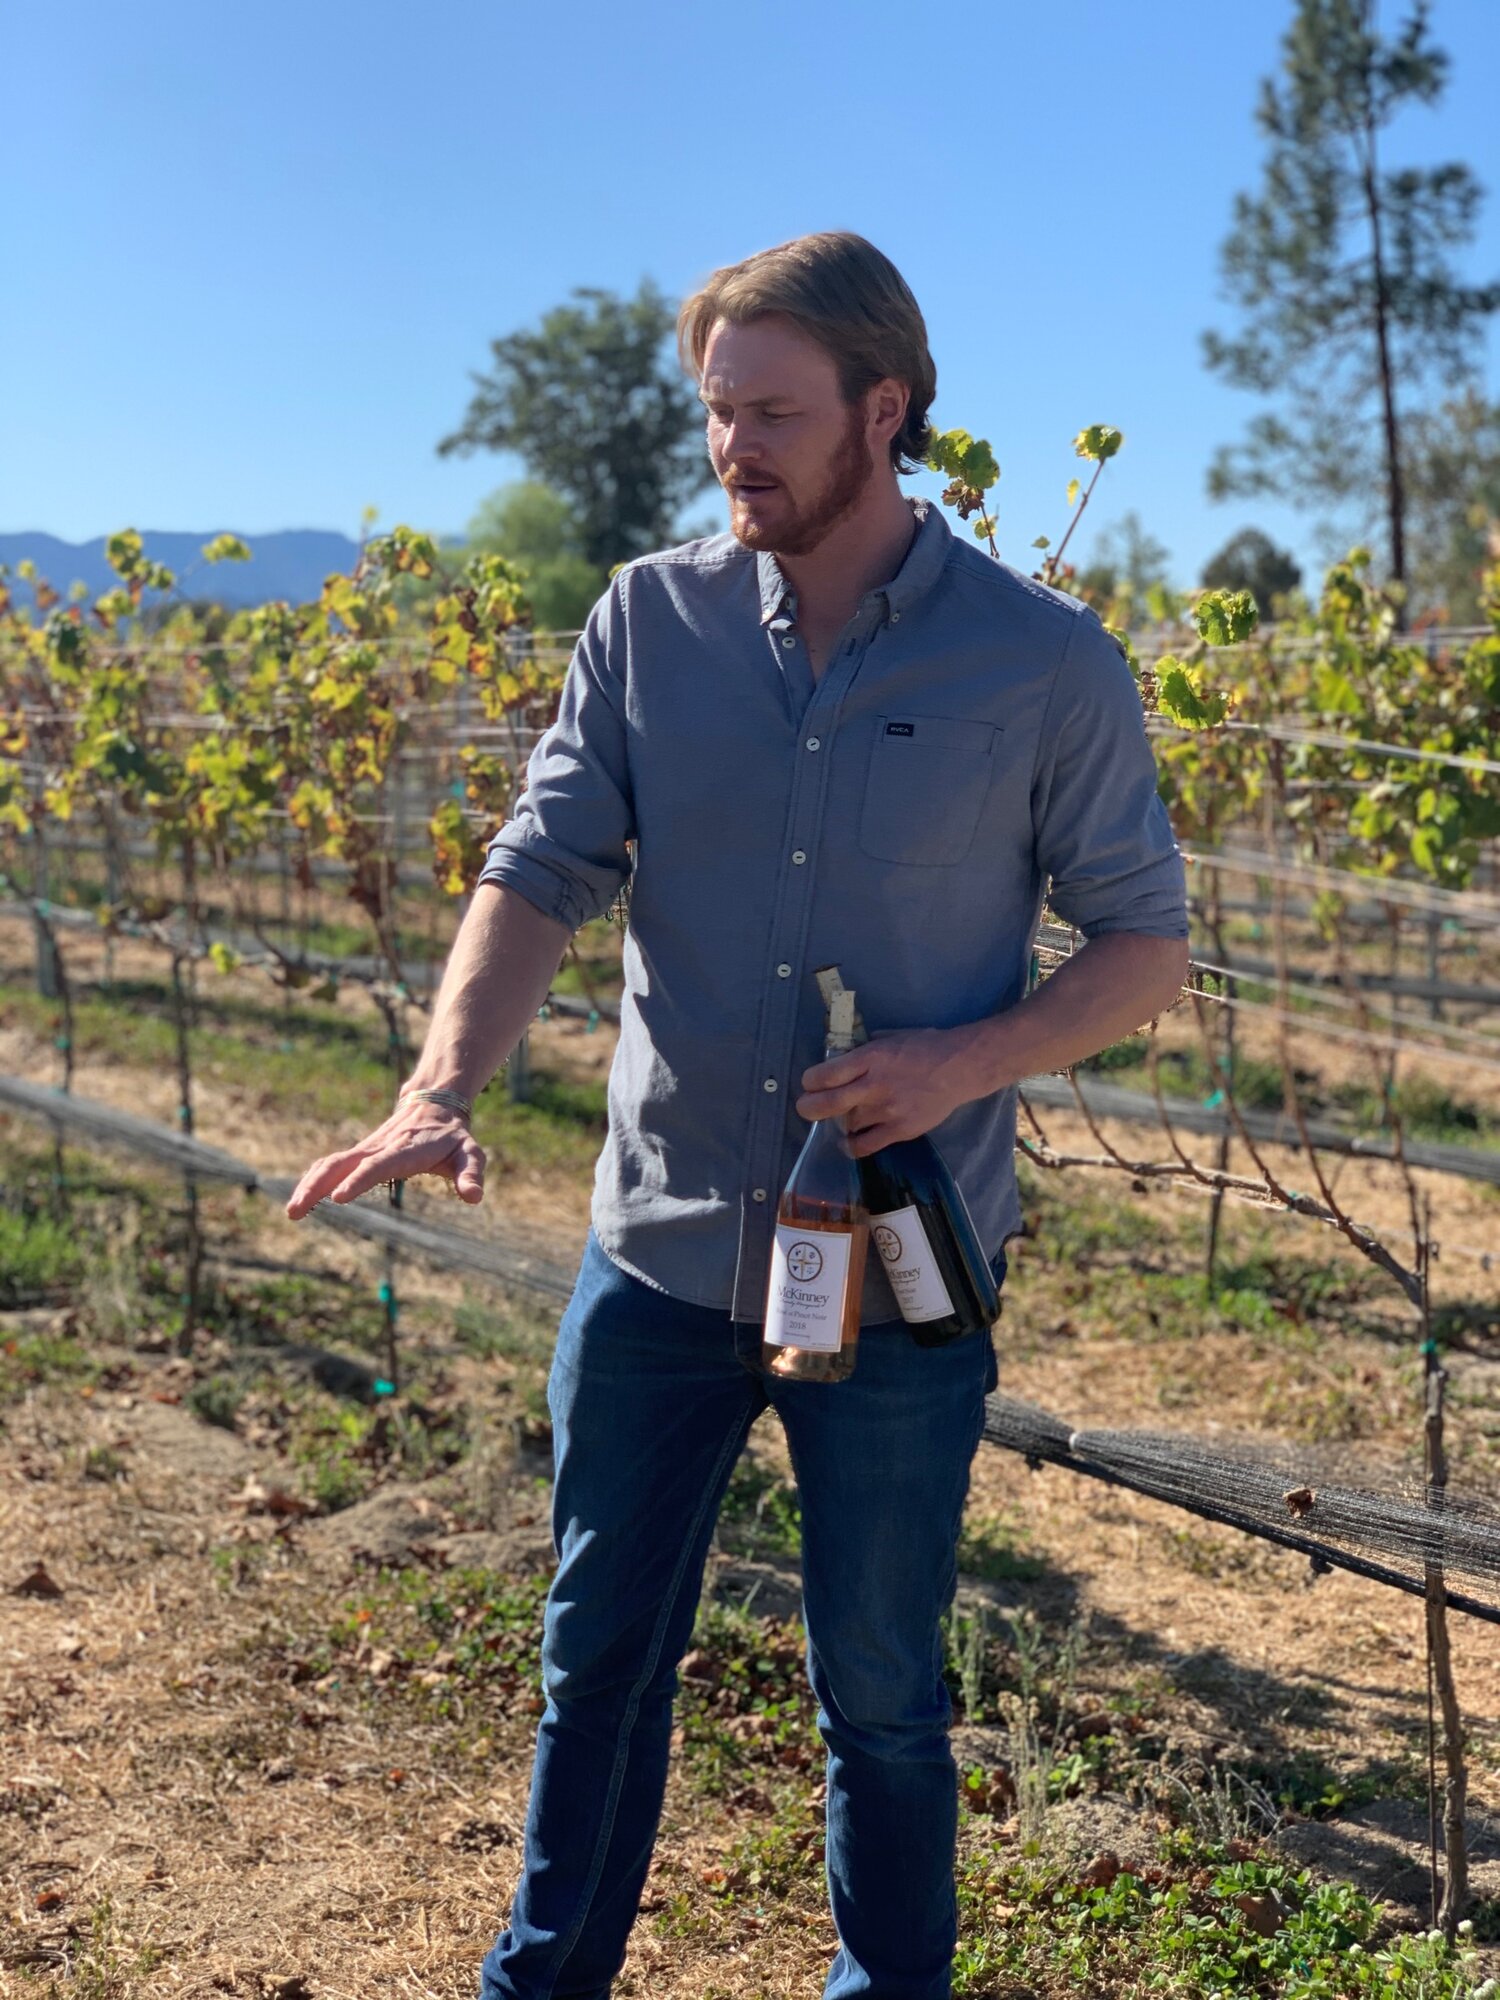 Assistant winemaker Justice teaching us about the vines.